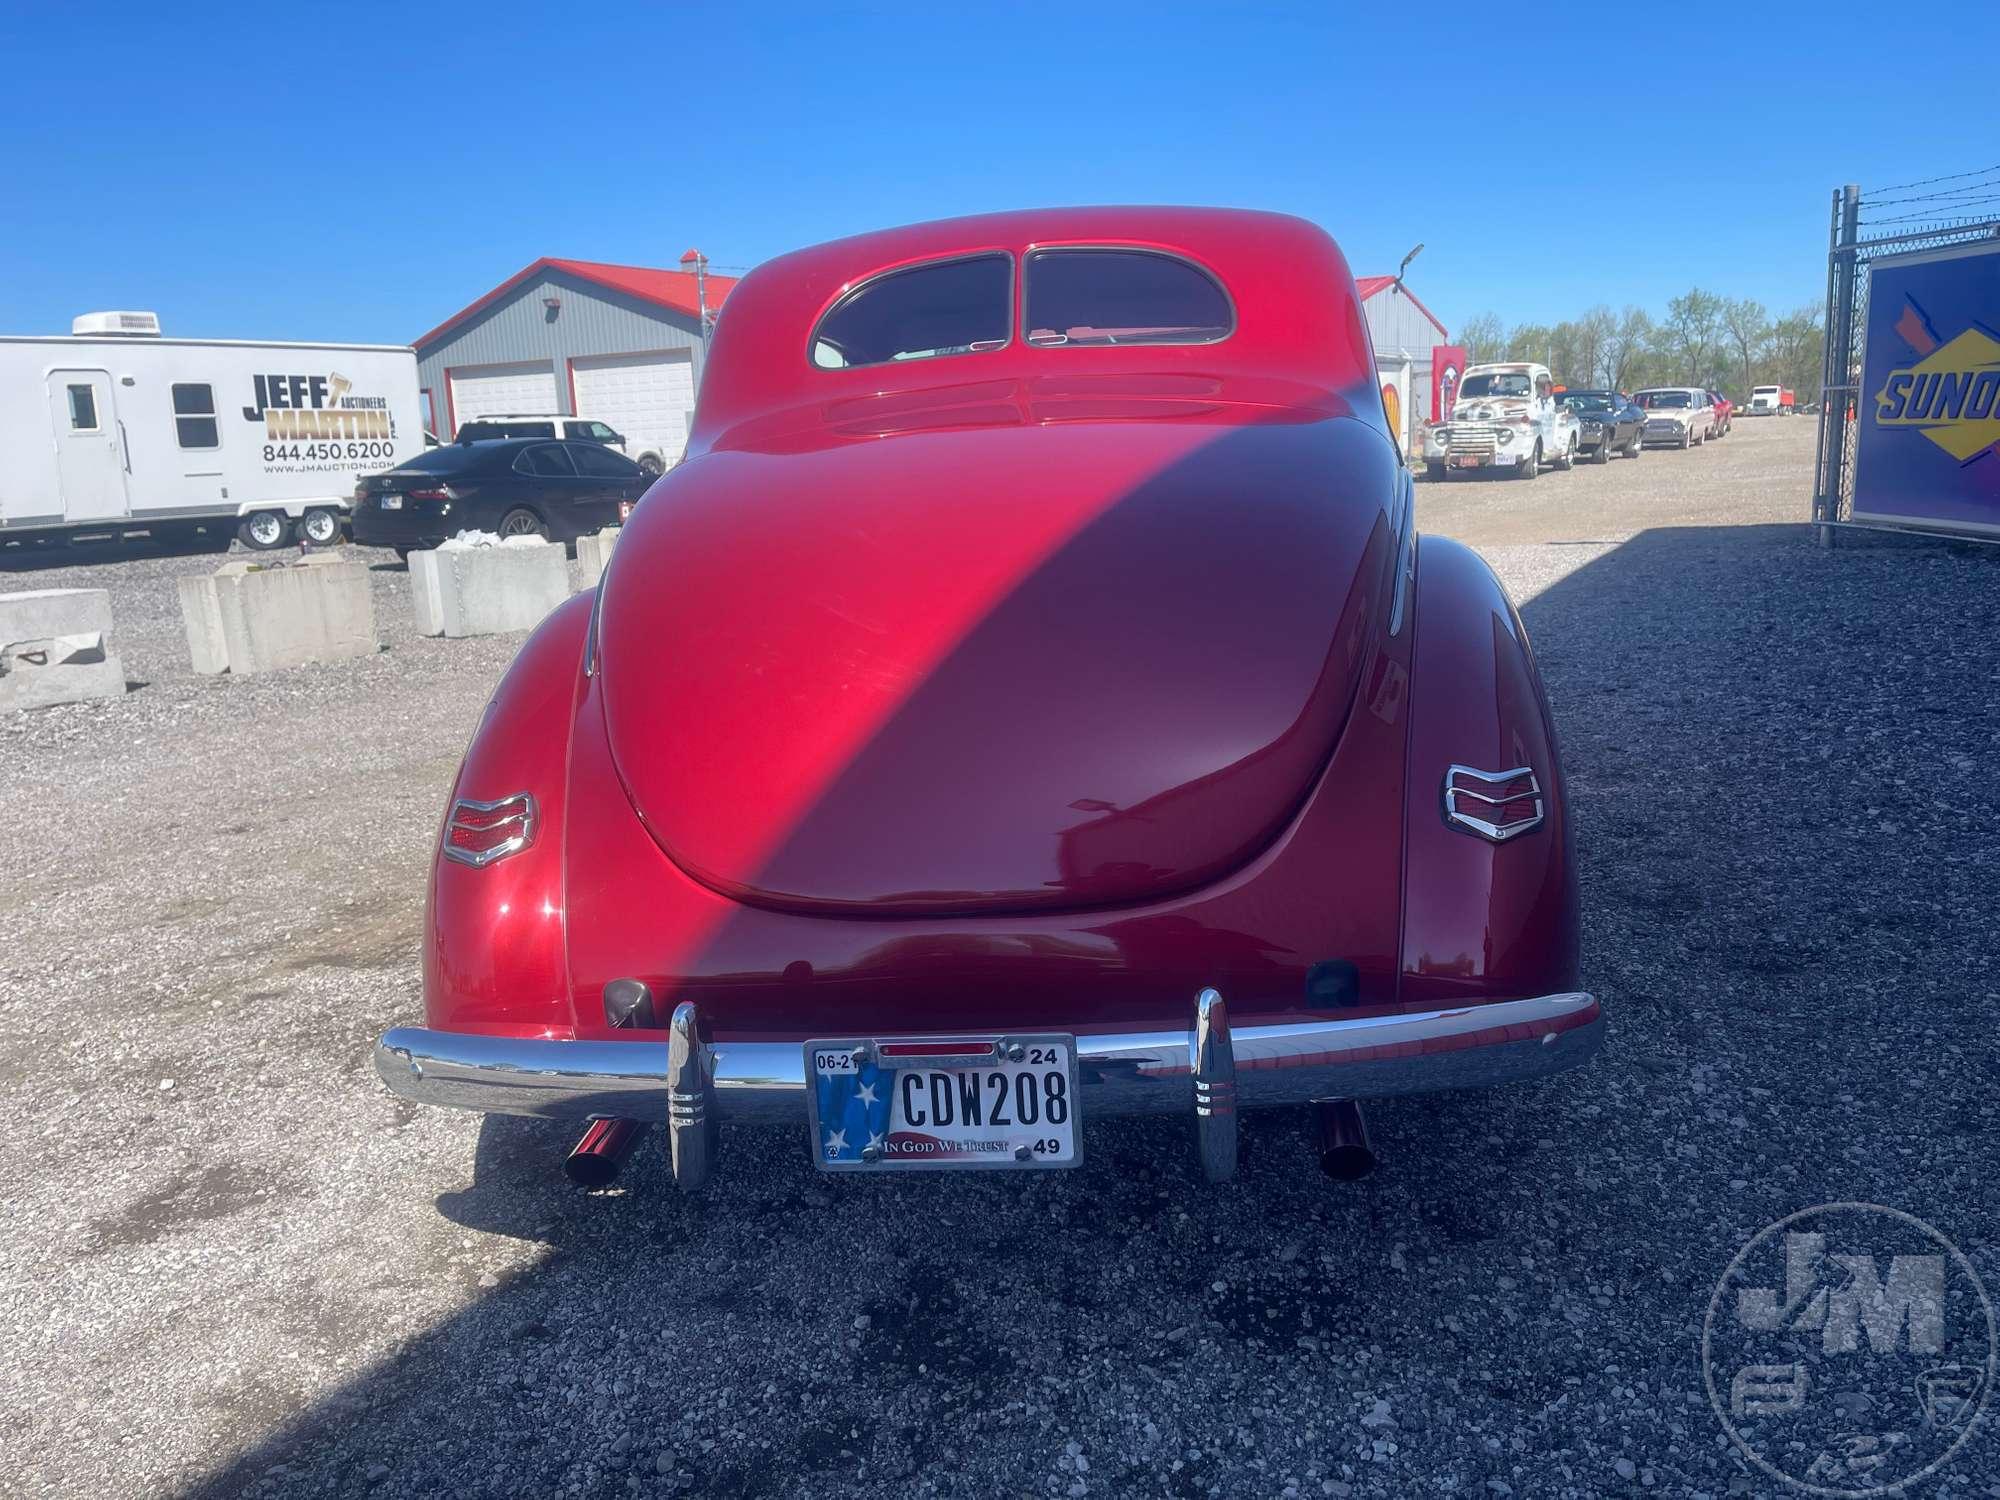 1940 FORD COUPE VIN: 724833